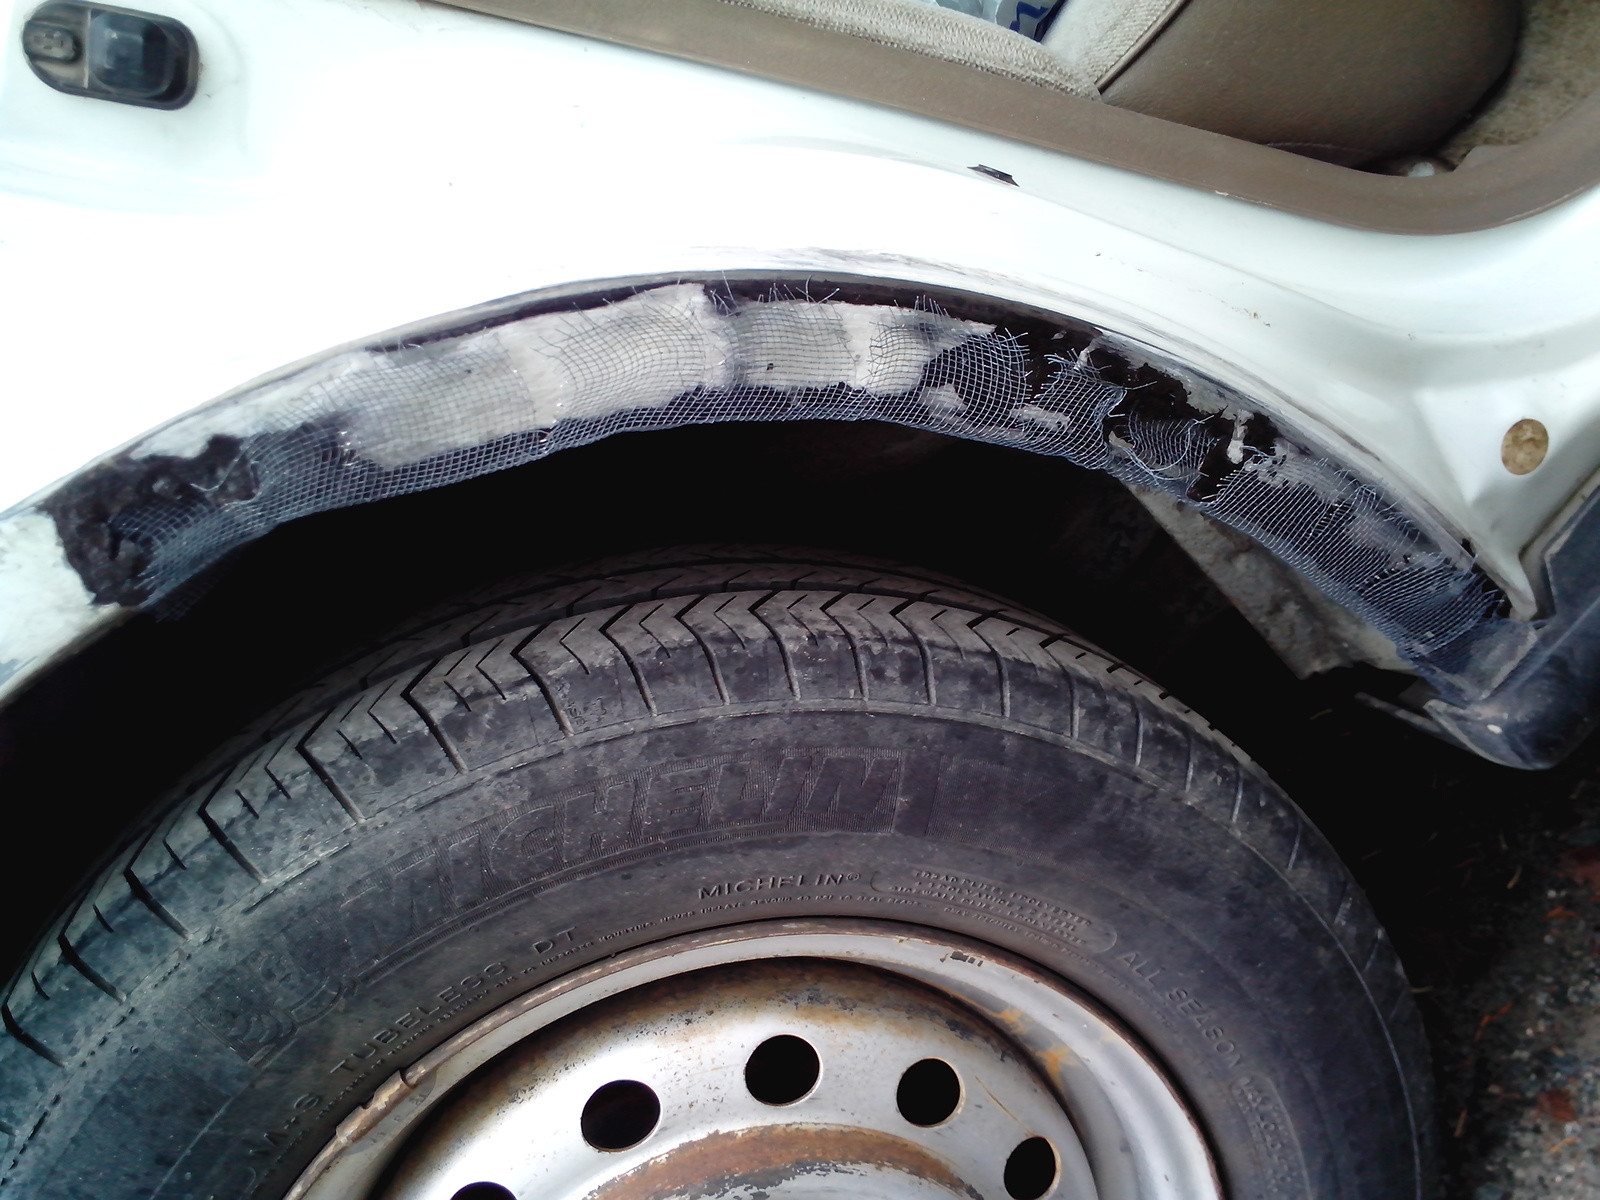 honda - Repair or replace rusted rear wheel arches on 92 Civic ...